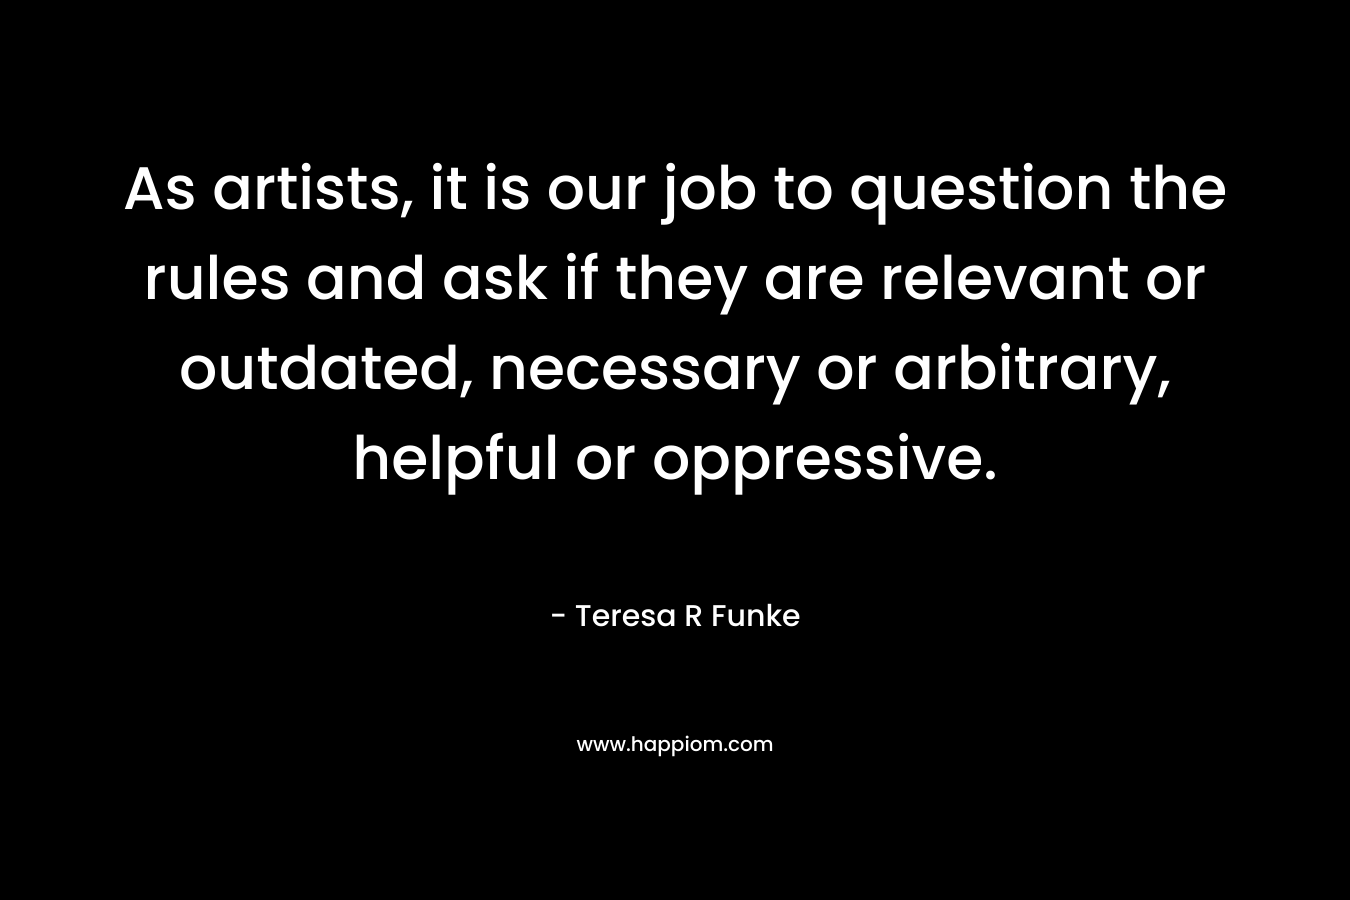 As artists, it is our job to question the rules and ask if they are relevant or outdated, necessary or arbitrary, helpful or oppressive.